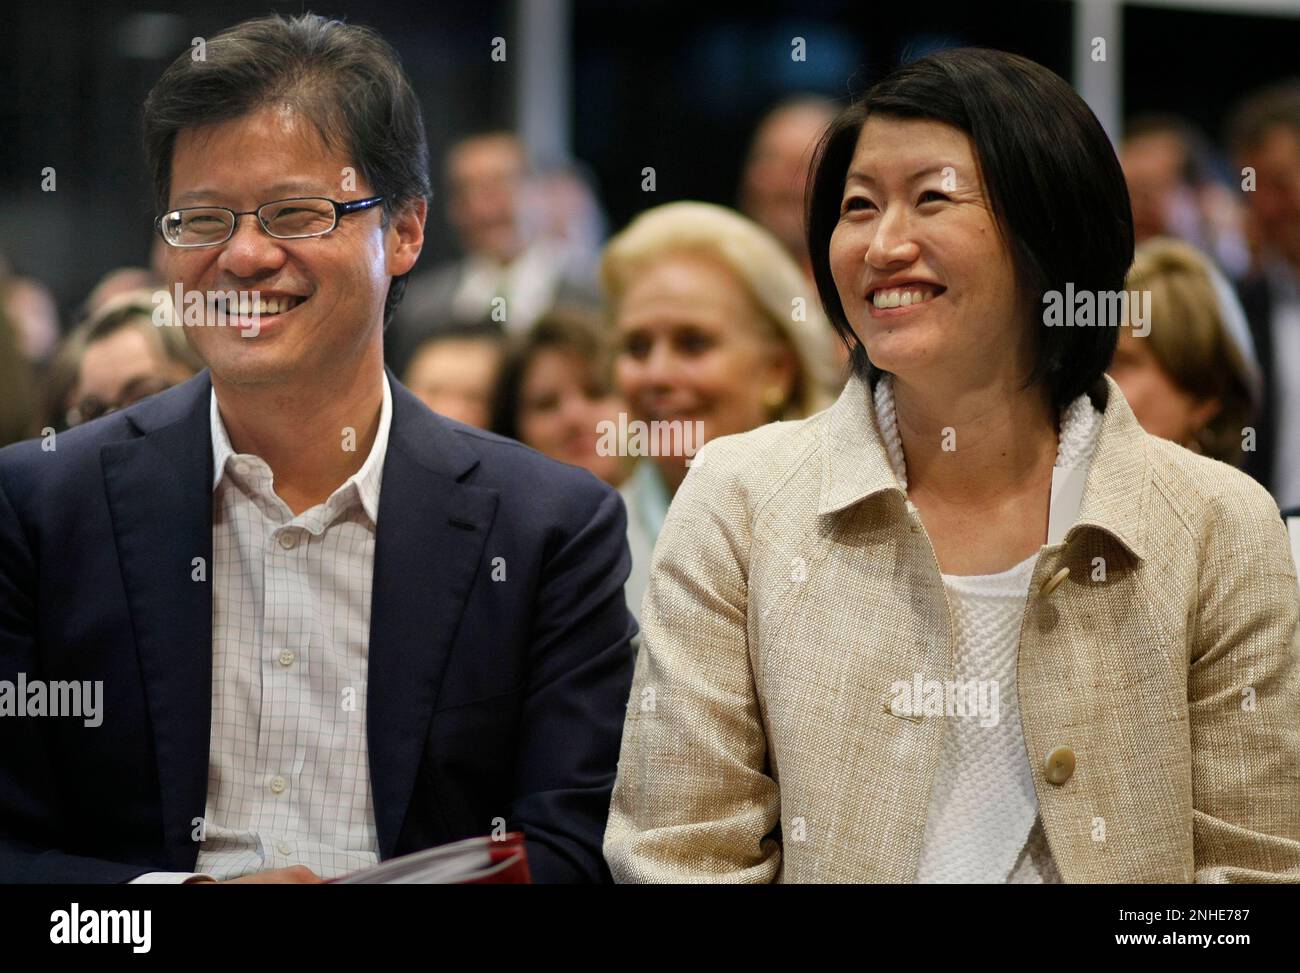 Yahoo CEO, Jerry Yang and his wife Akiko Yamazaki attend the dedication ceremony for the Jerry Yang and Akiko Yamazaki Environment and Energy building at Stanford University in Palo Alto, Calif., on Mar. 4, 2008. Photo by Michael Macor/ San Francisco Chronicle (Michael Macor/San Francisco Chronicle via AP) Stock Photo